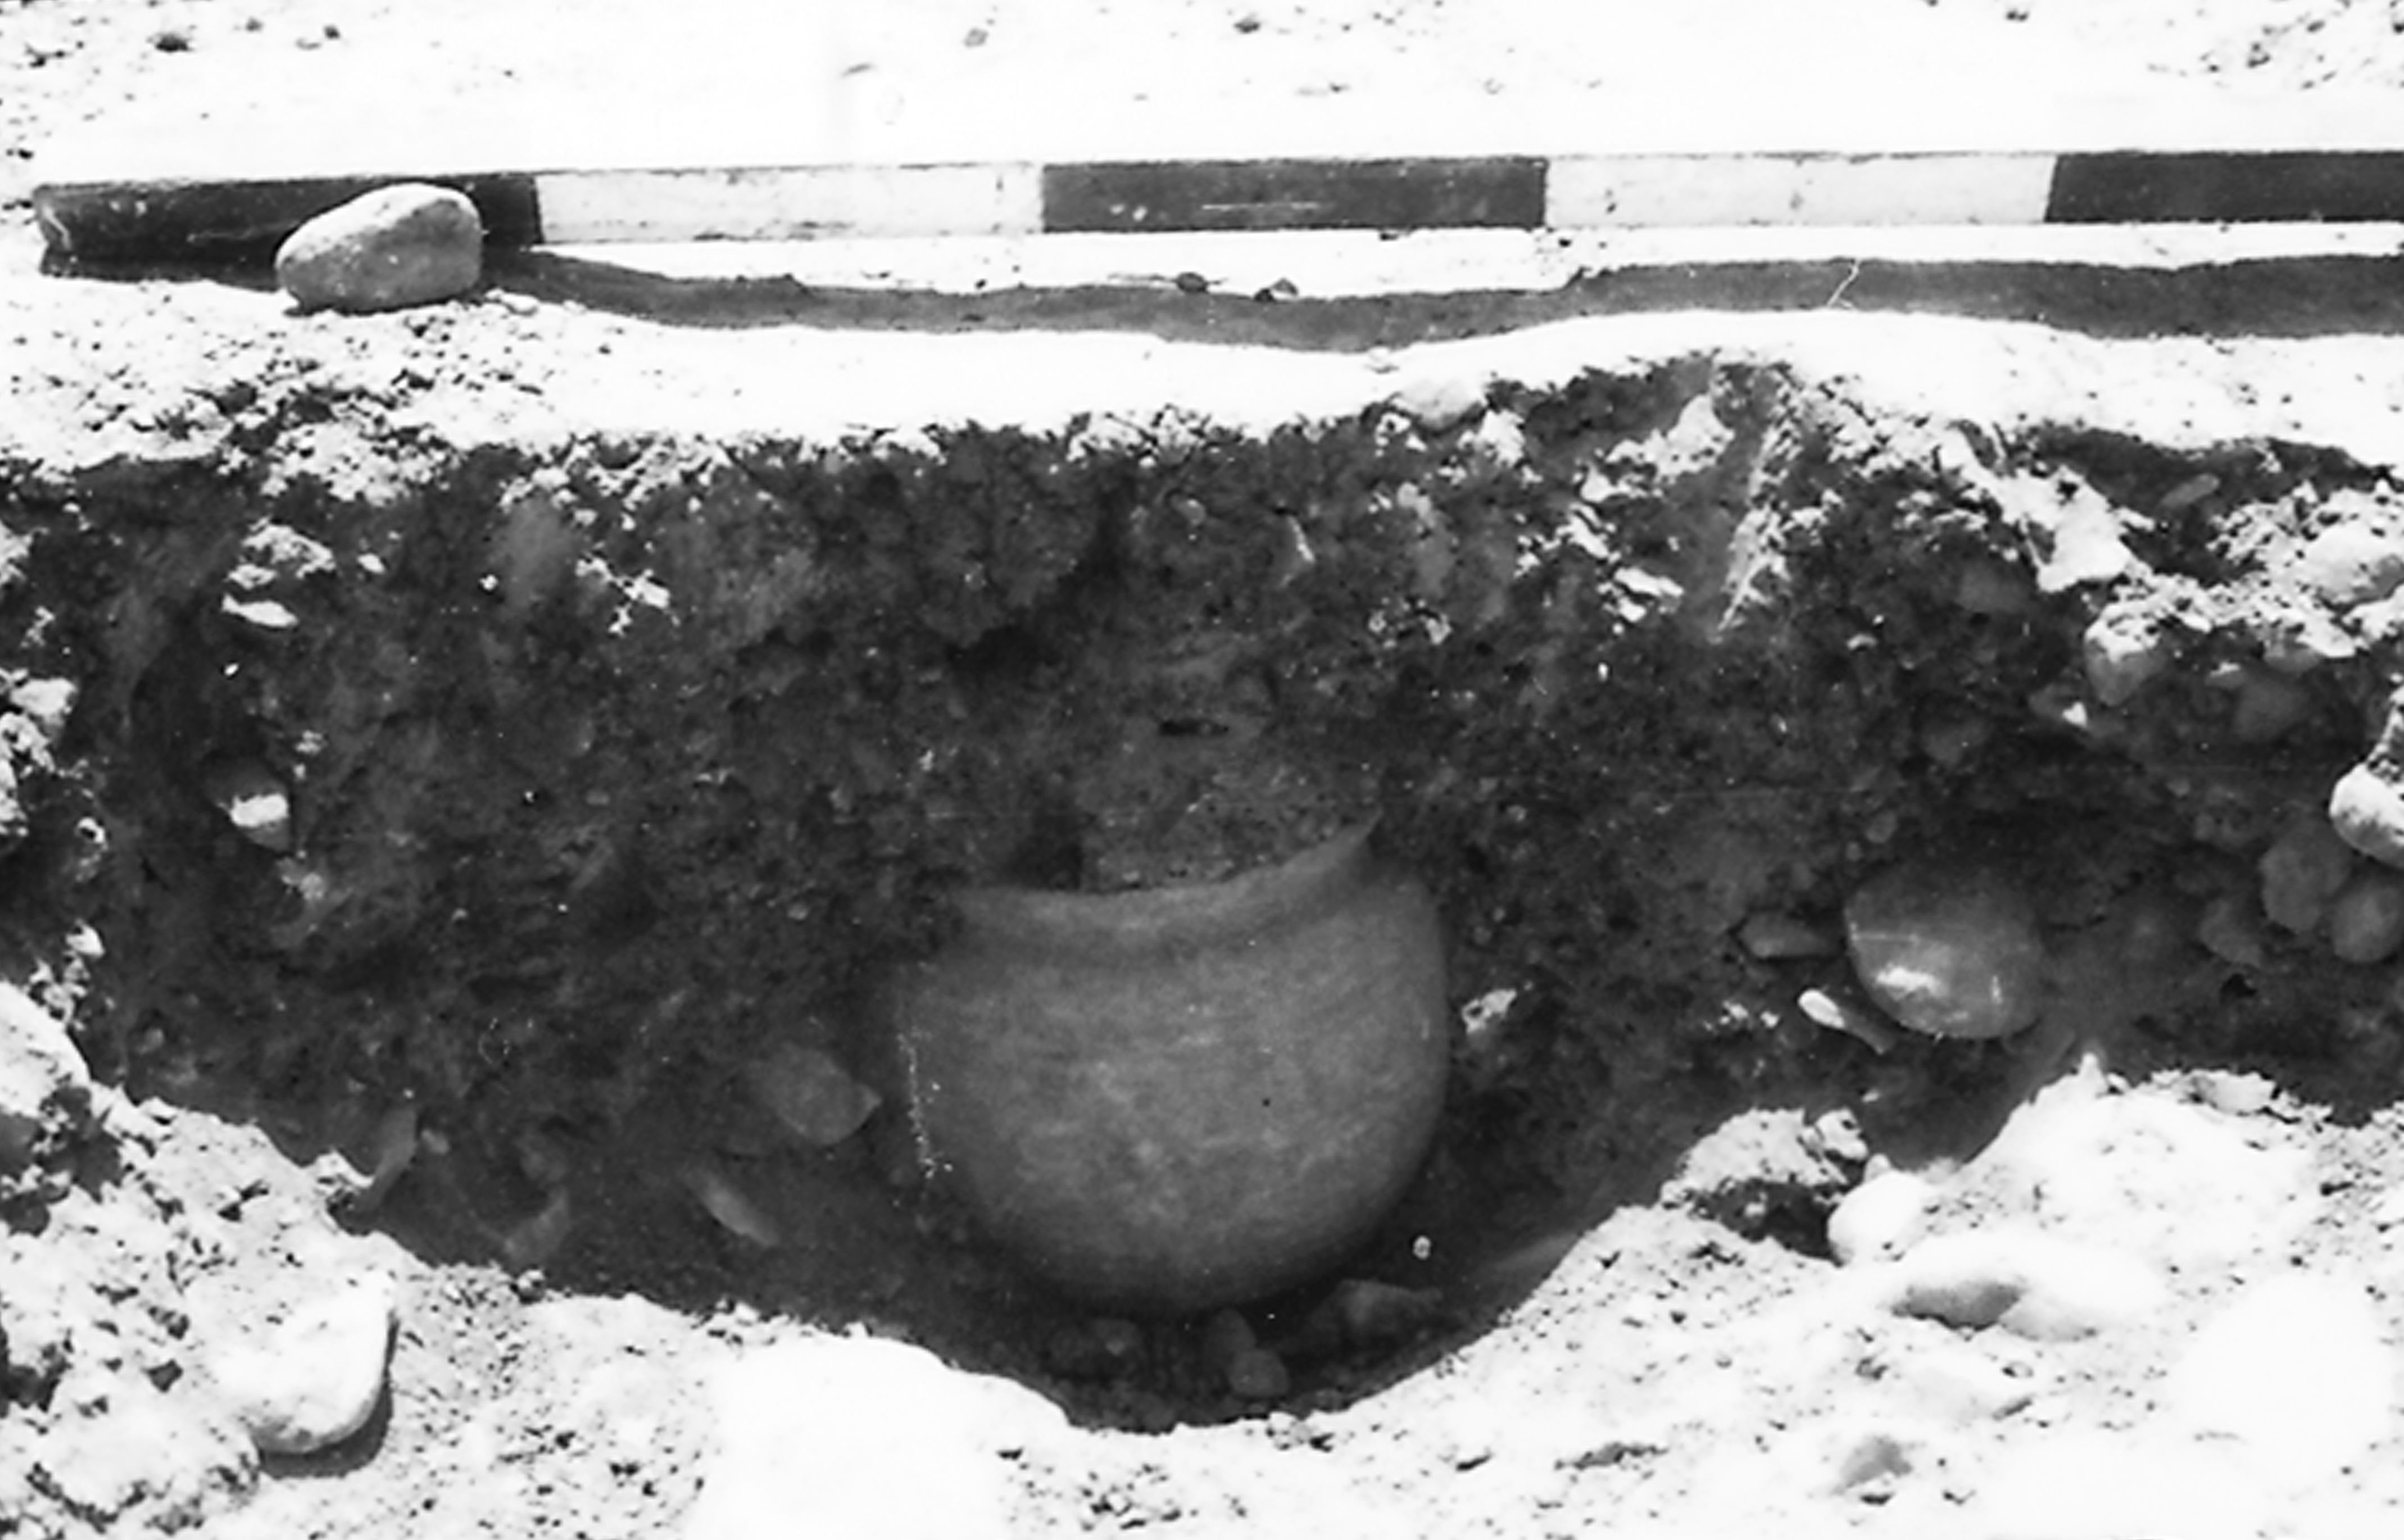 Figure 6: A planting pot No. 23 found in the Ionic Peristyle Courtyard B64 (K. Gleason).